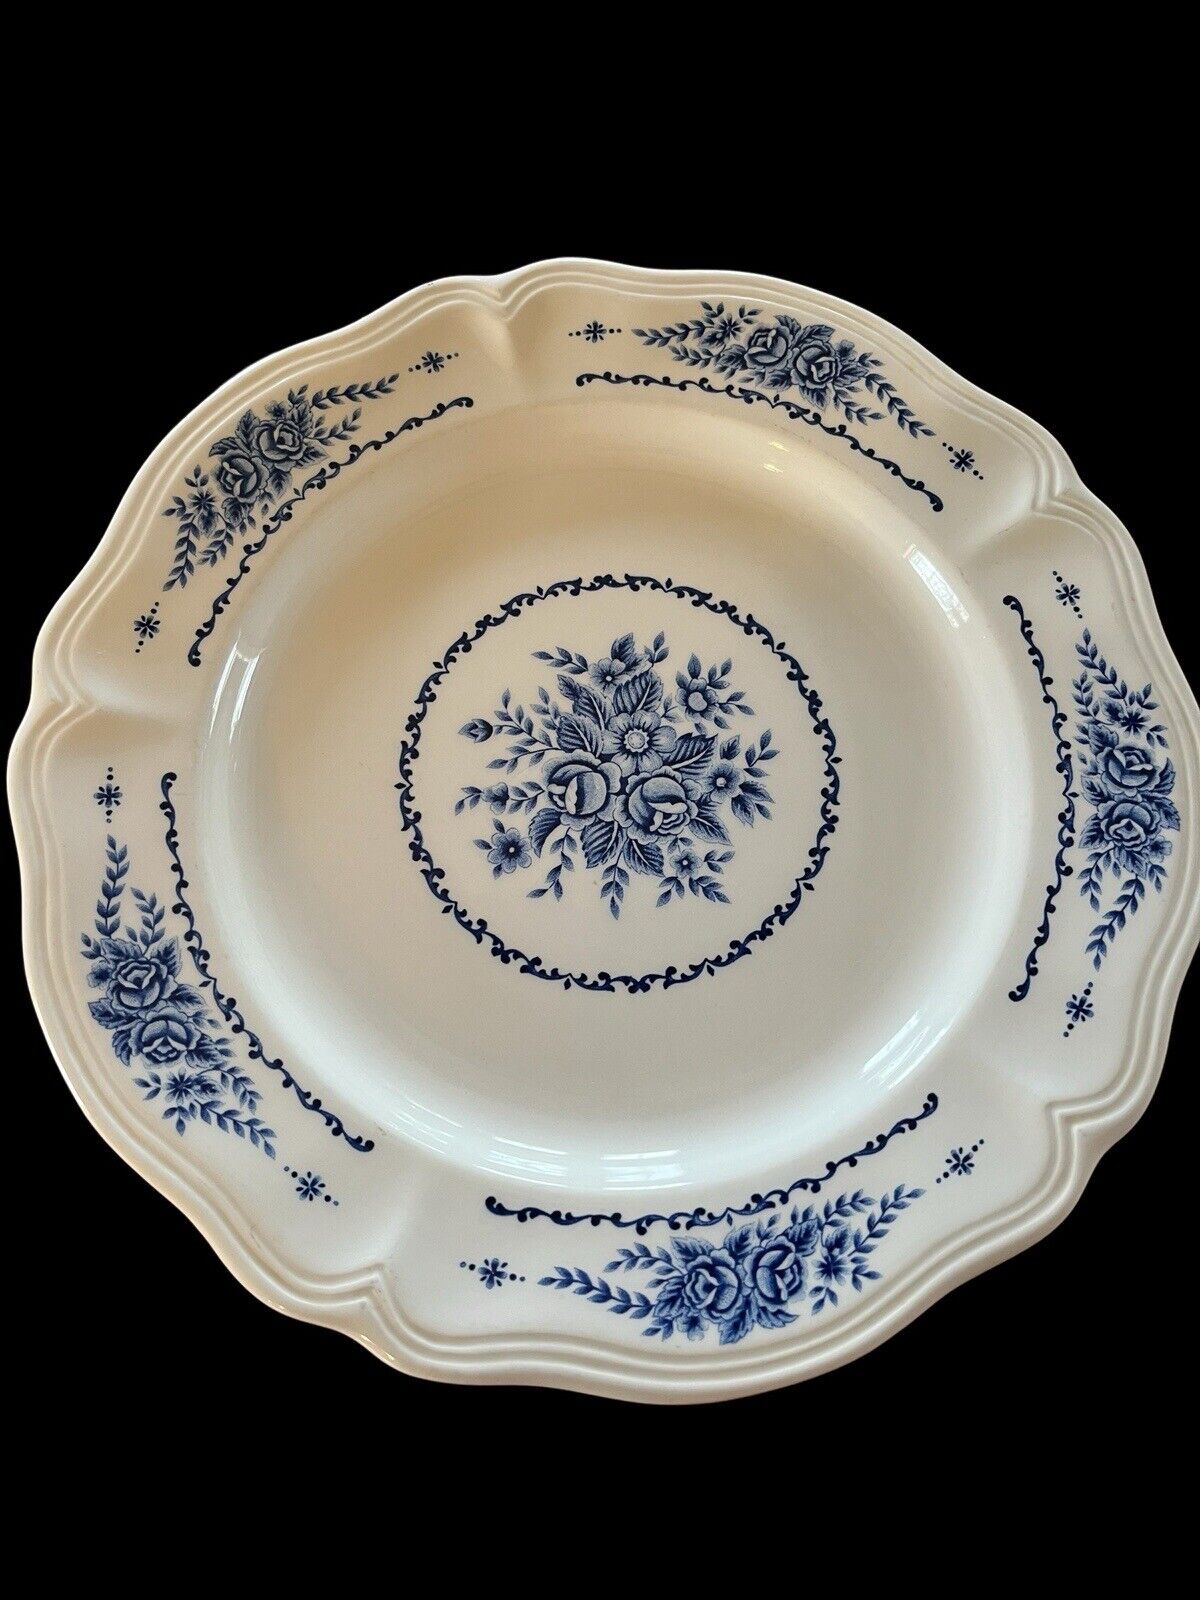 Vintage Mayhill Federalist Plate, Blue and White, Great Condition